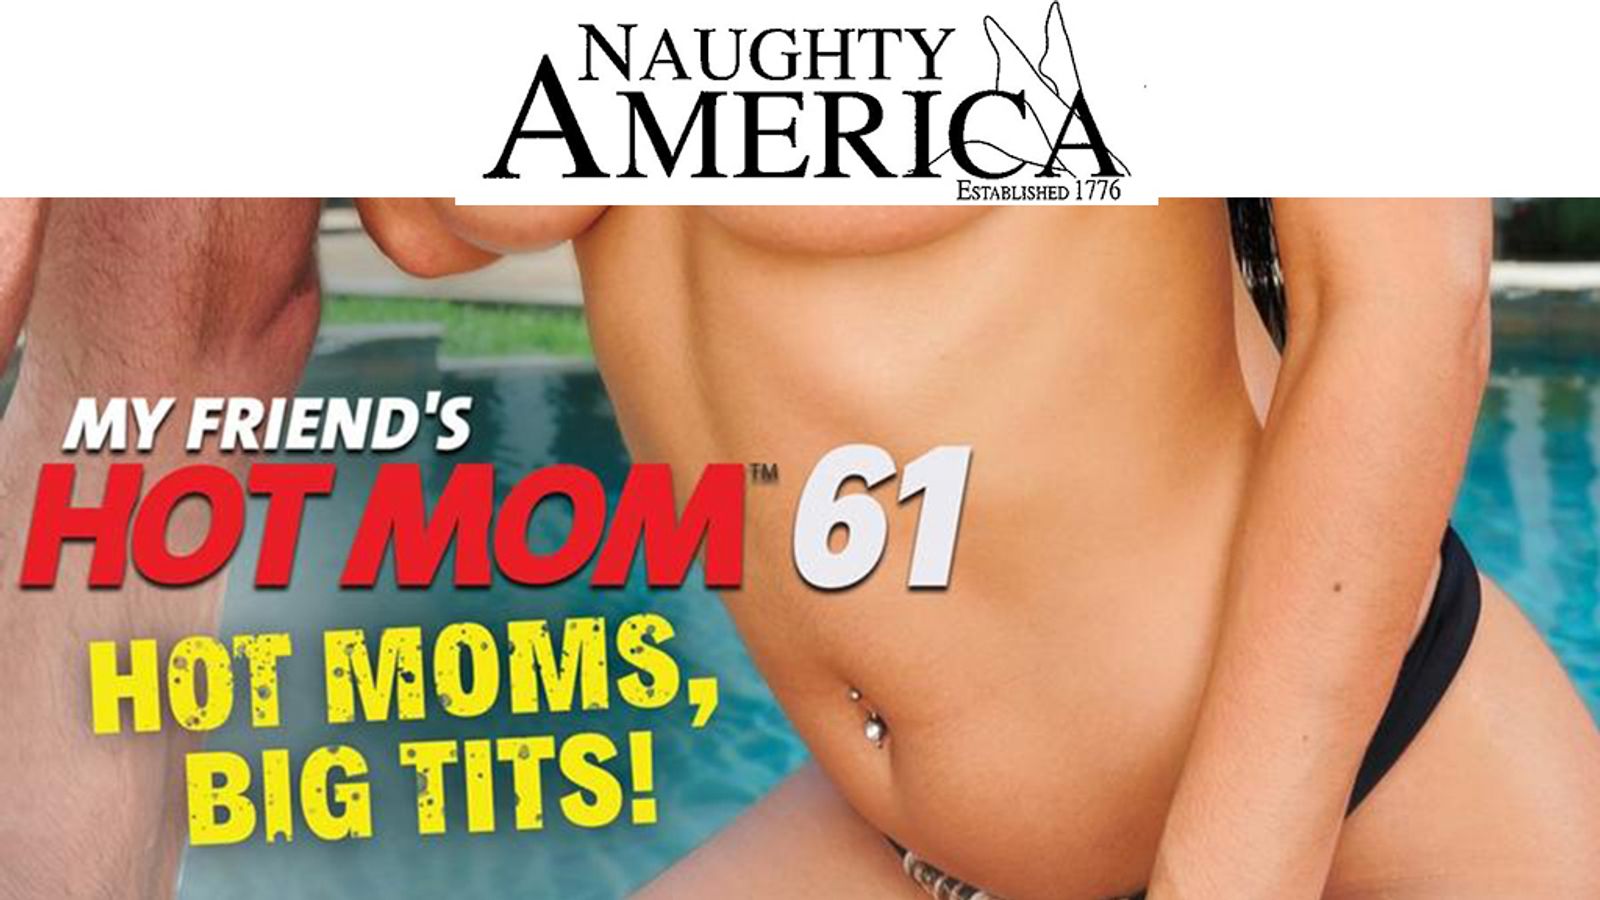 Naughty America Releases ‘My Friend’s Hot Mom 61’